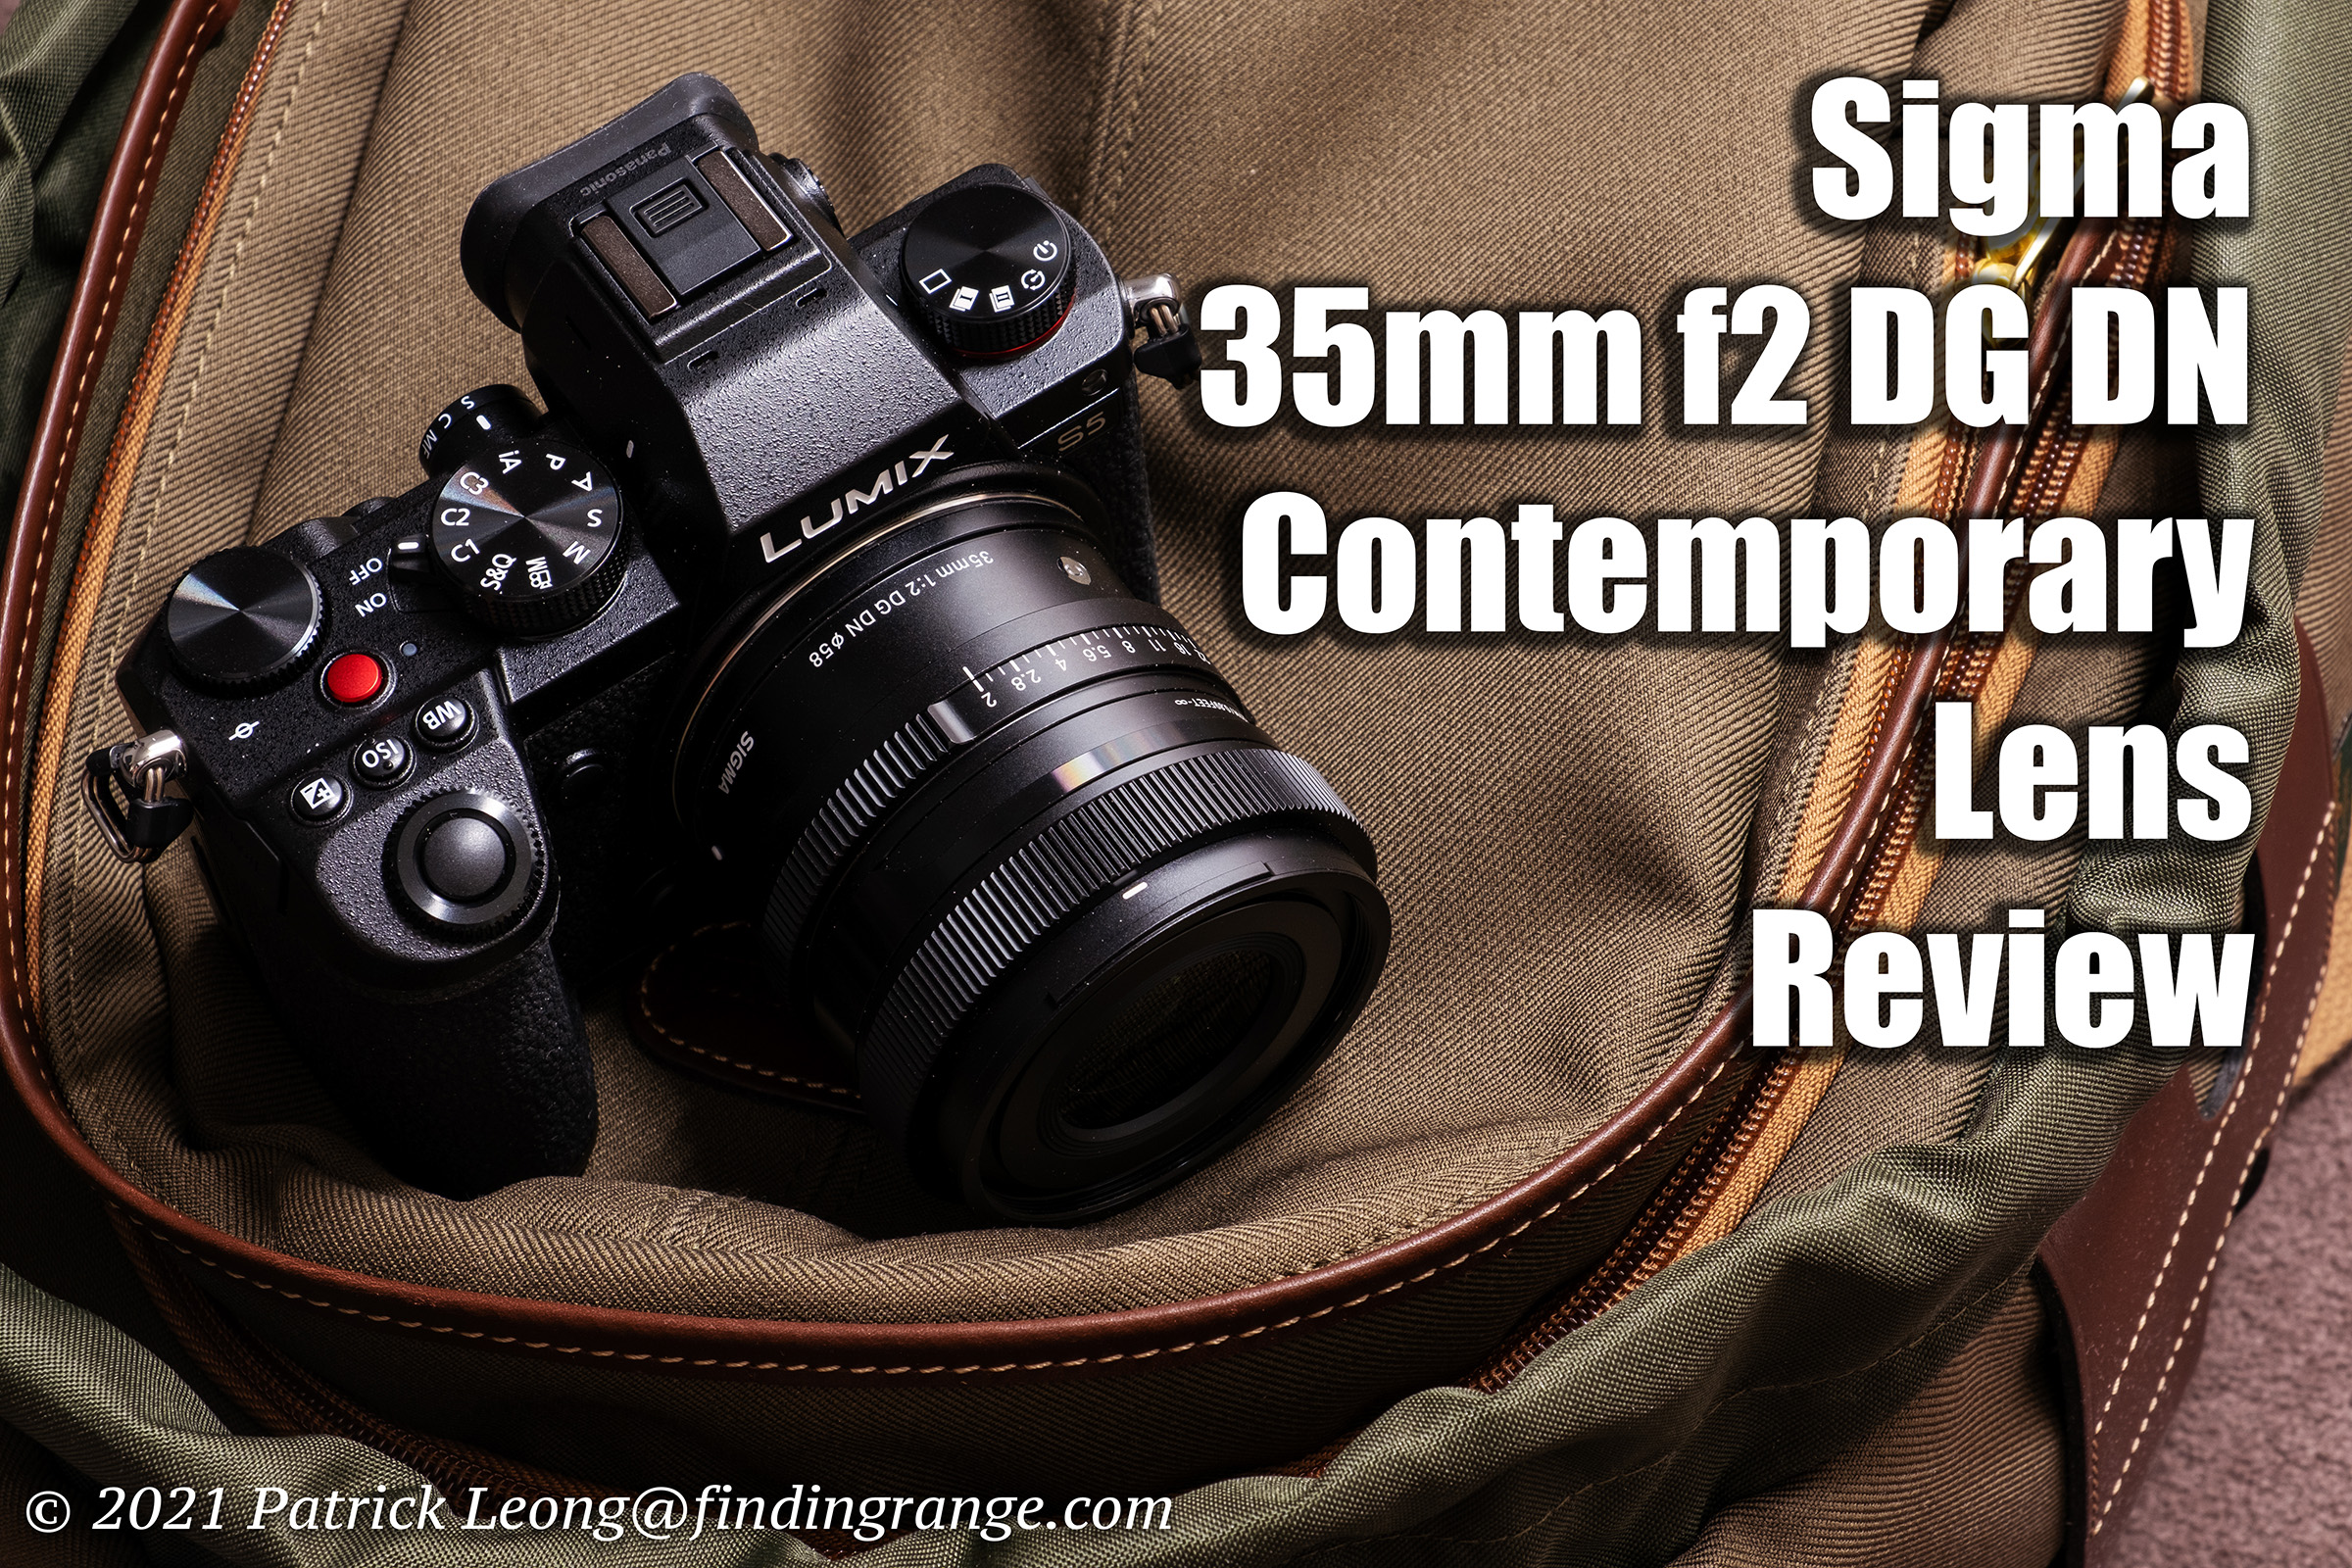 Sigma 35mm f2 DG DN Contemporary Lens Review - Finding Range